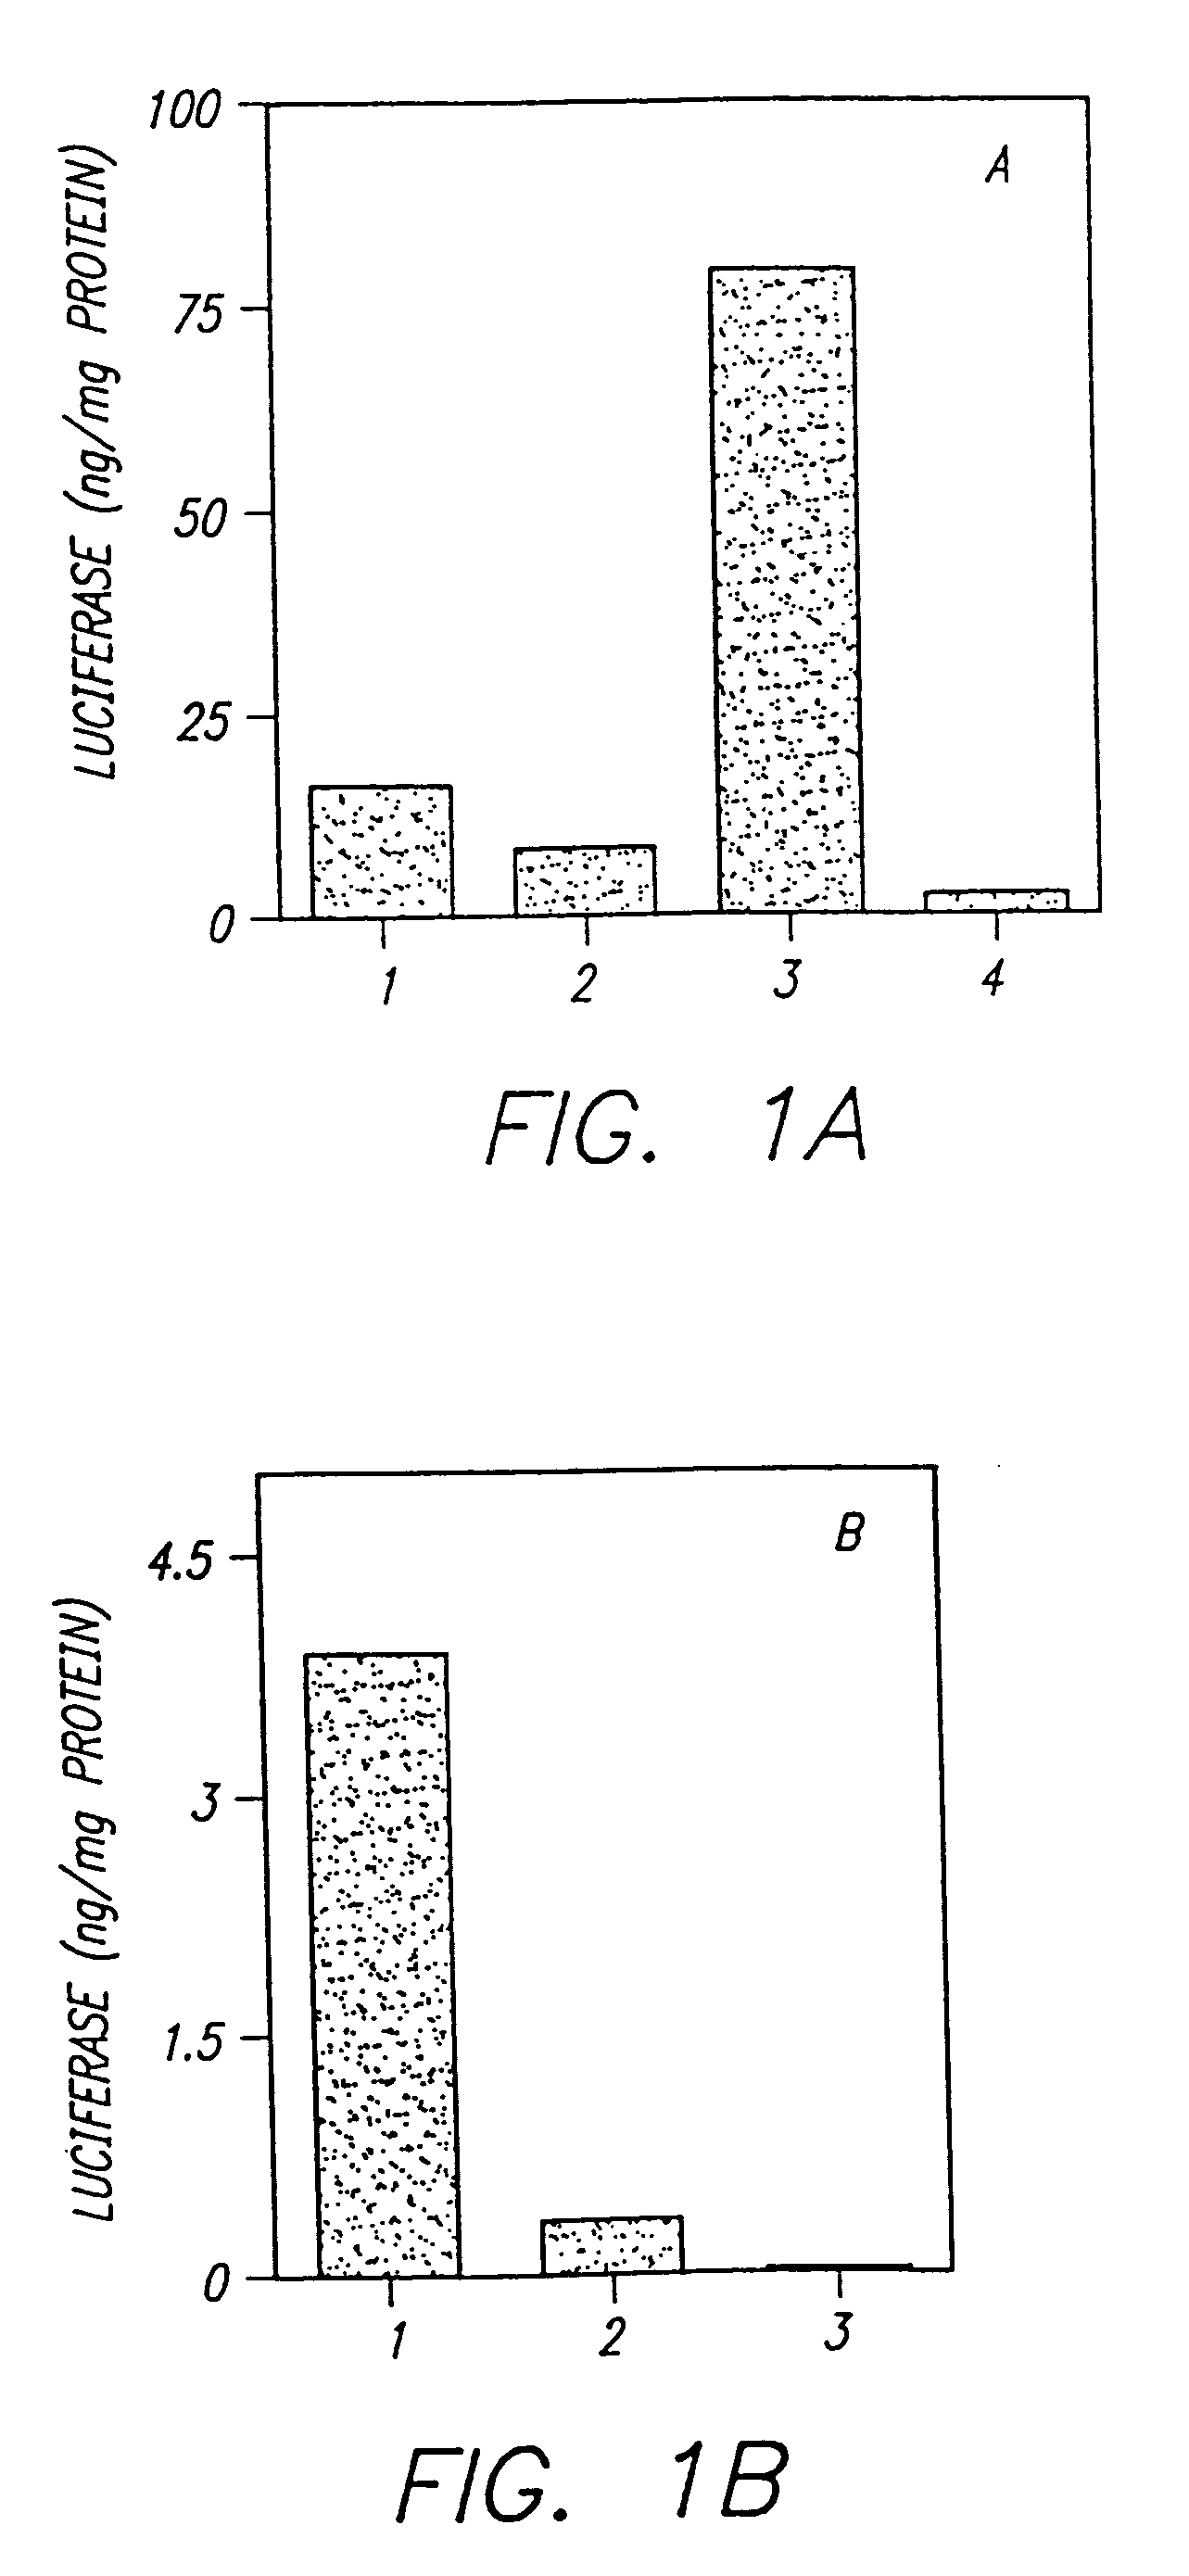 Methods for attaching proteins to lipidic microparticles with high efficiency